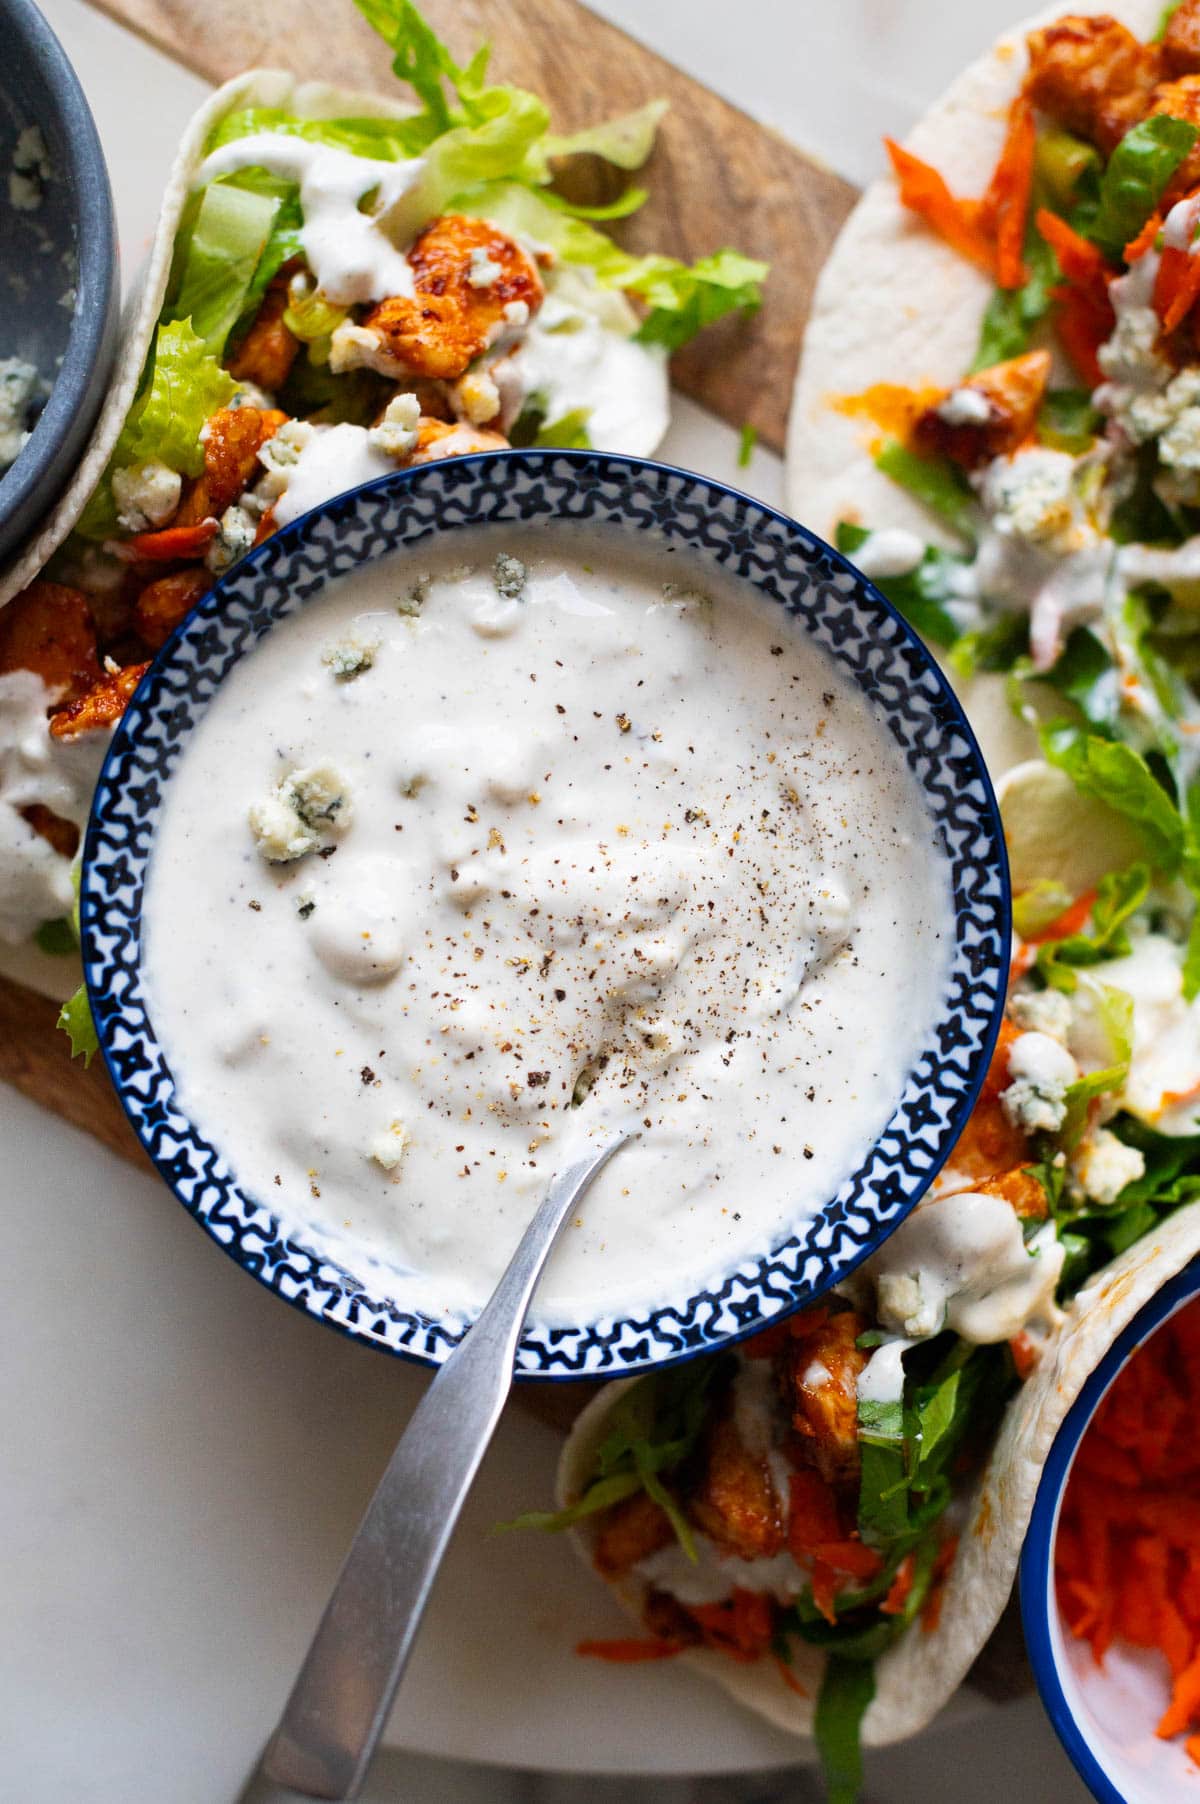 Greek yogurt blue cheese dressing in a bowl with a spoon. Buffalo chicken tacos around it on a board.